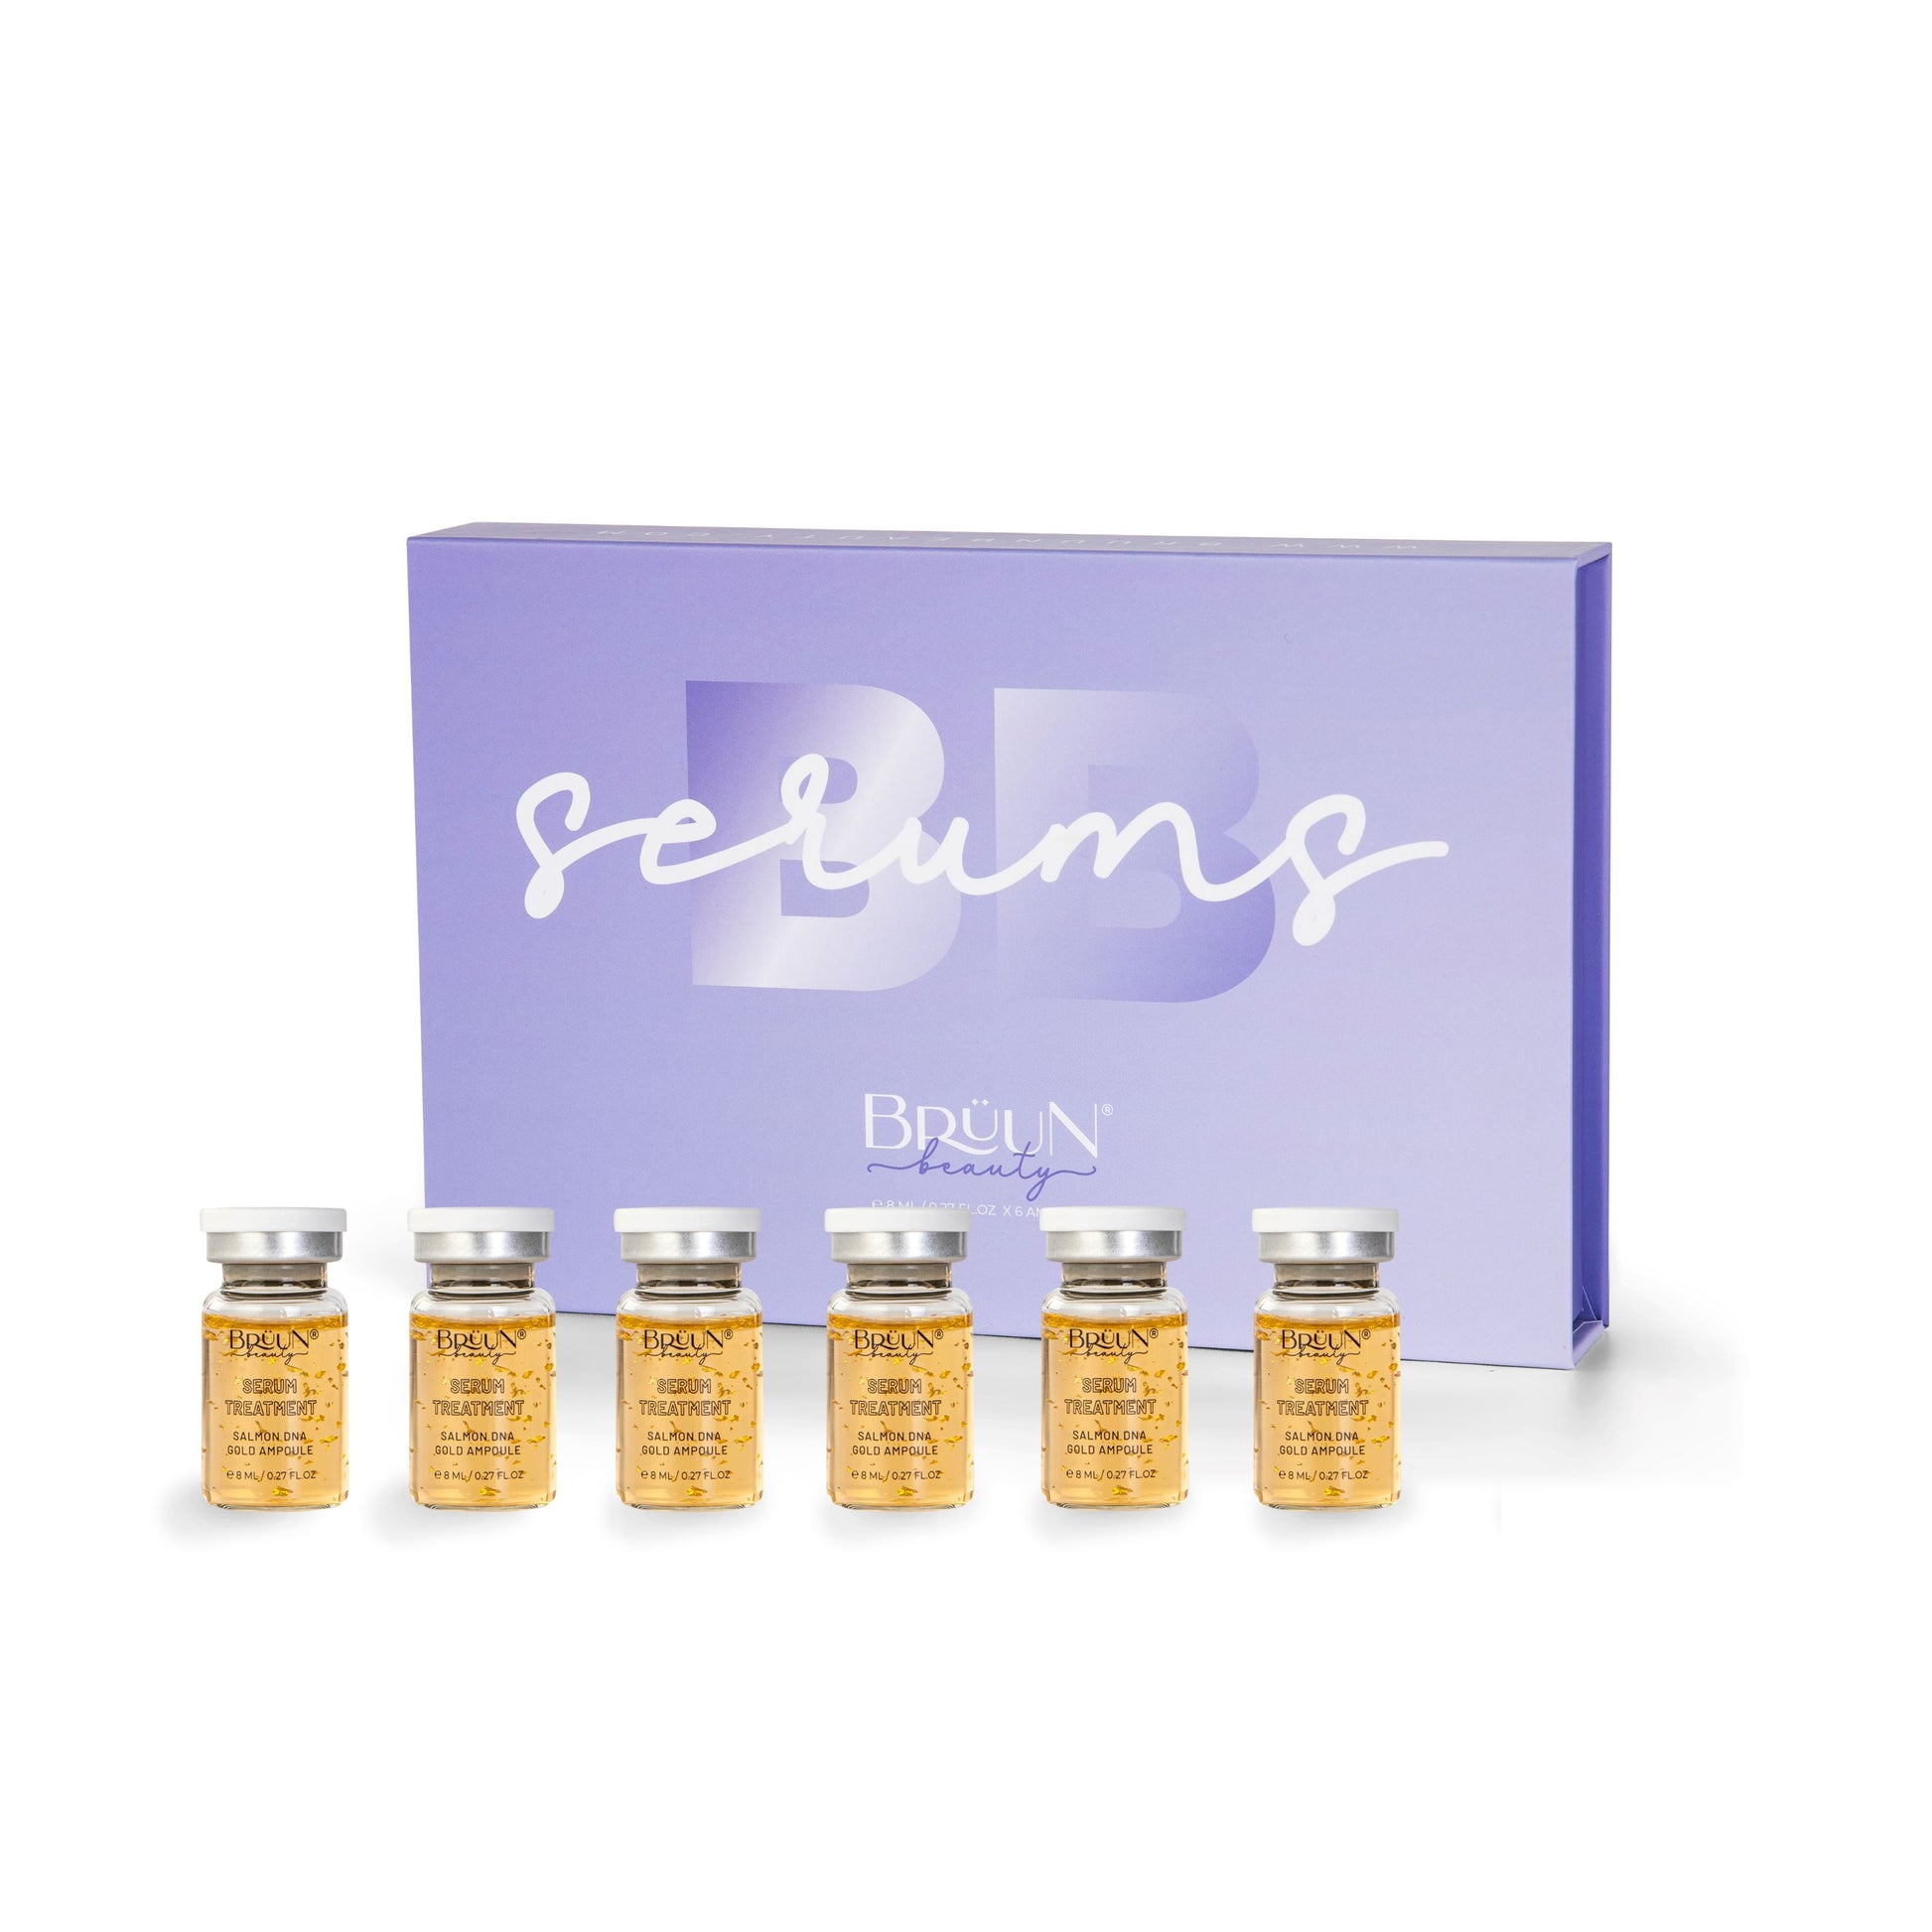 BB Glow Serum Ampoule – A (Pack of 6) SD Gold Ampoule for Healthy Skin Tissue Growth Bruun Beauty 